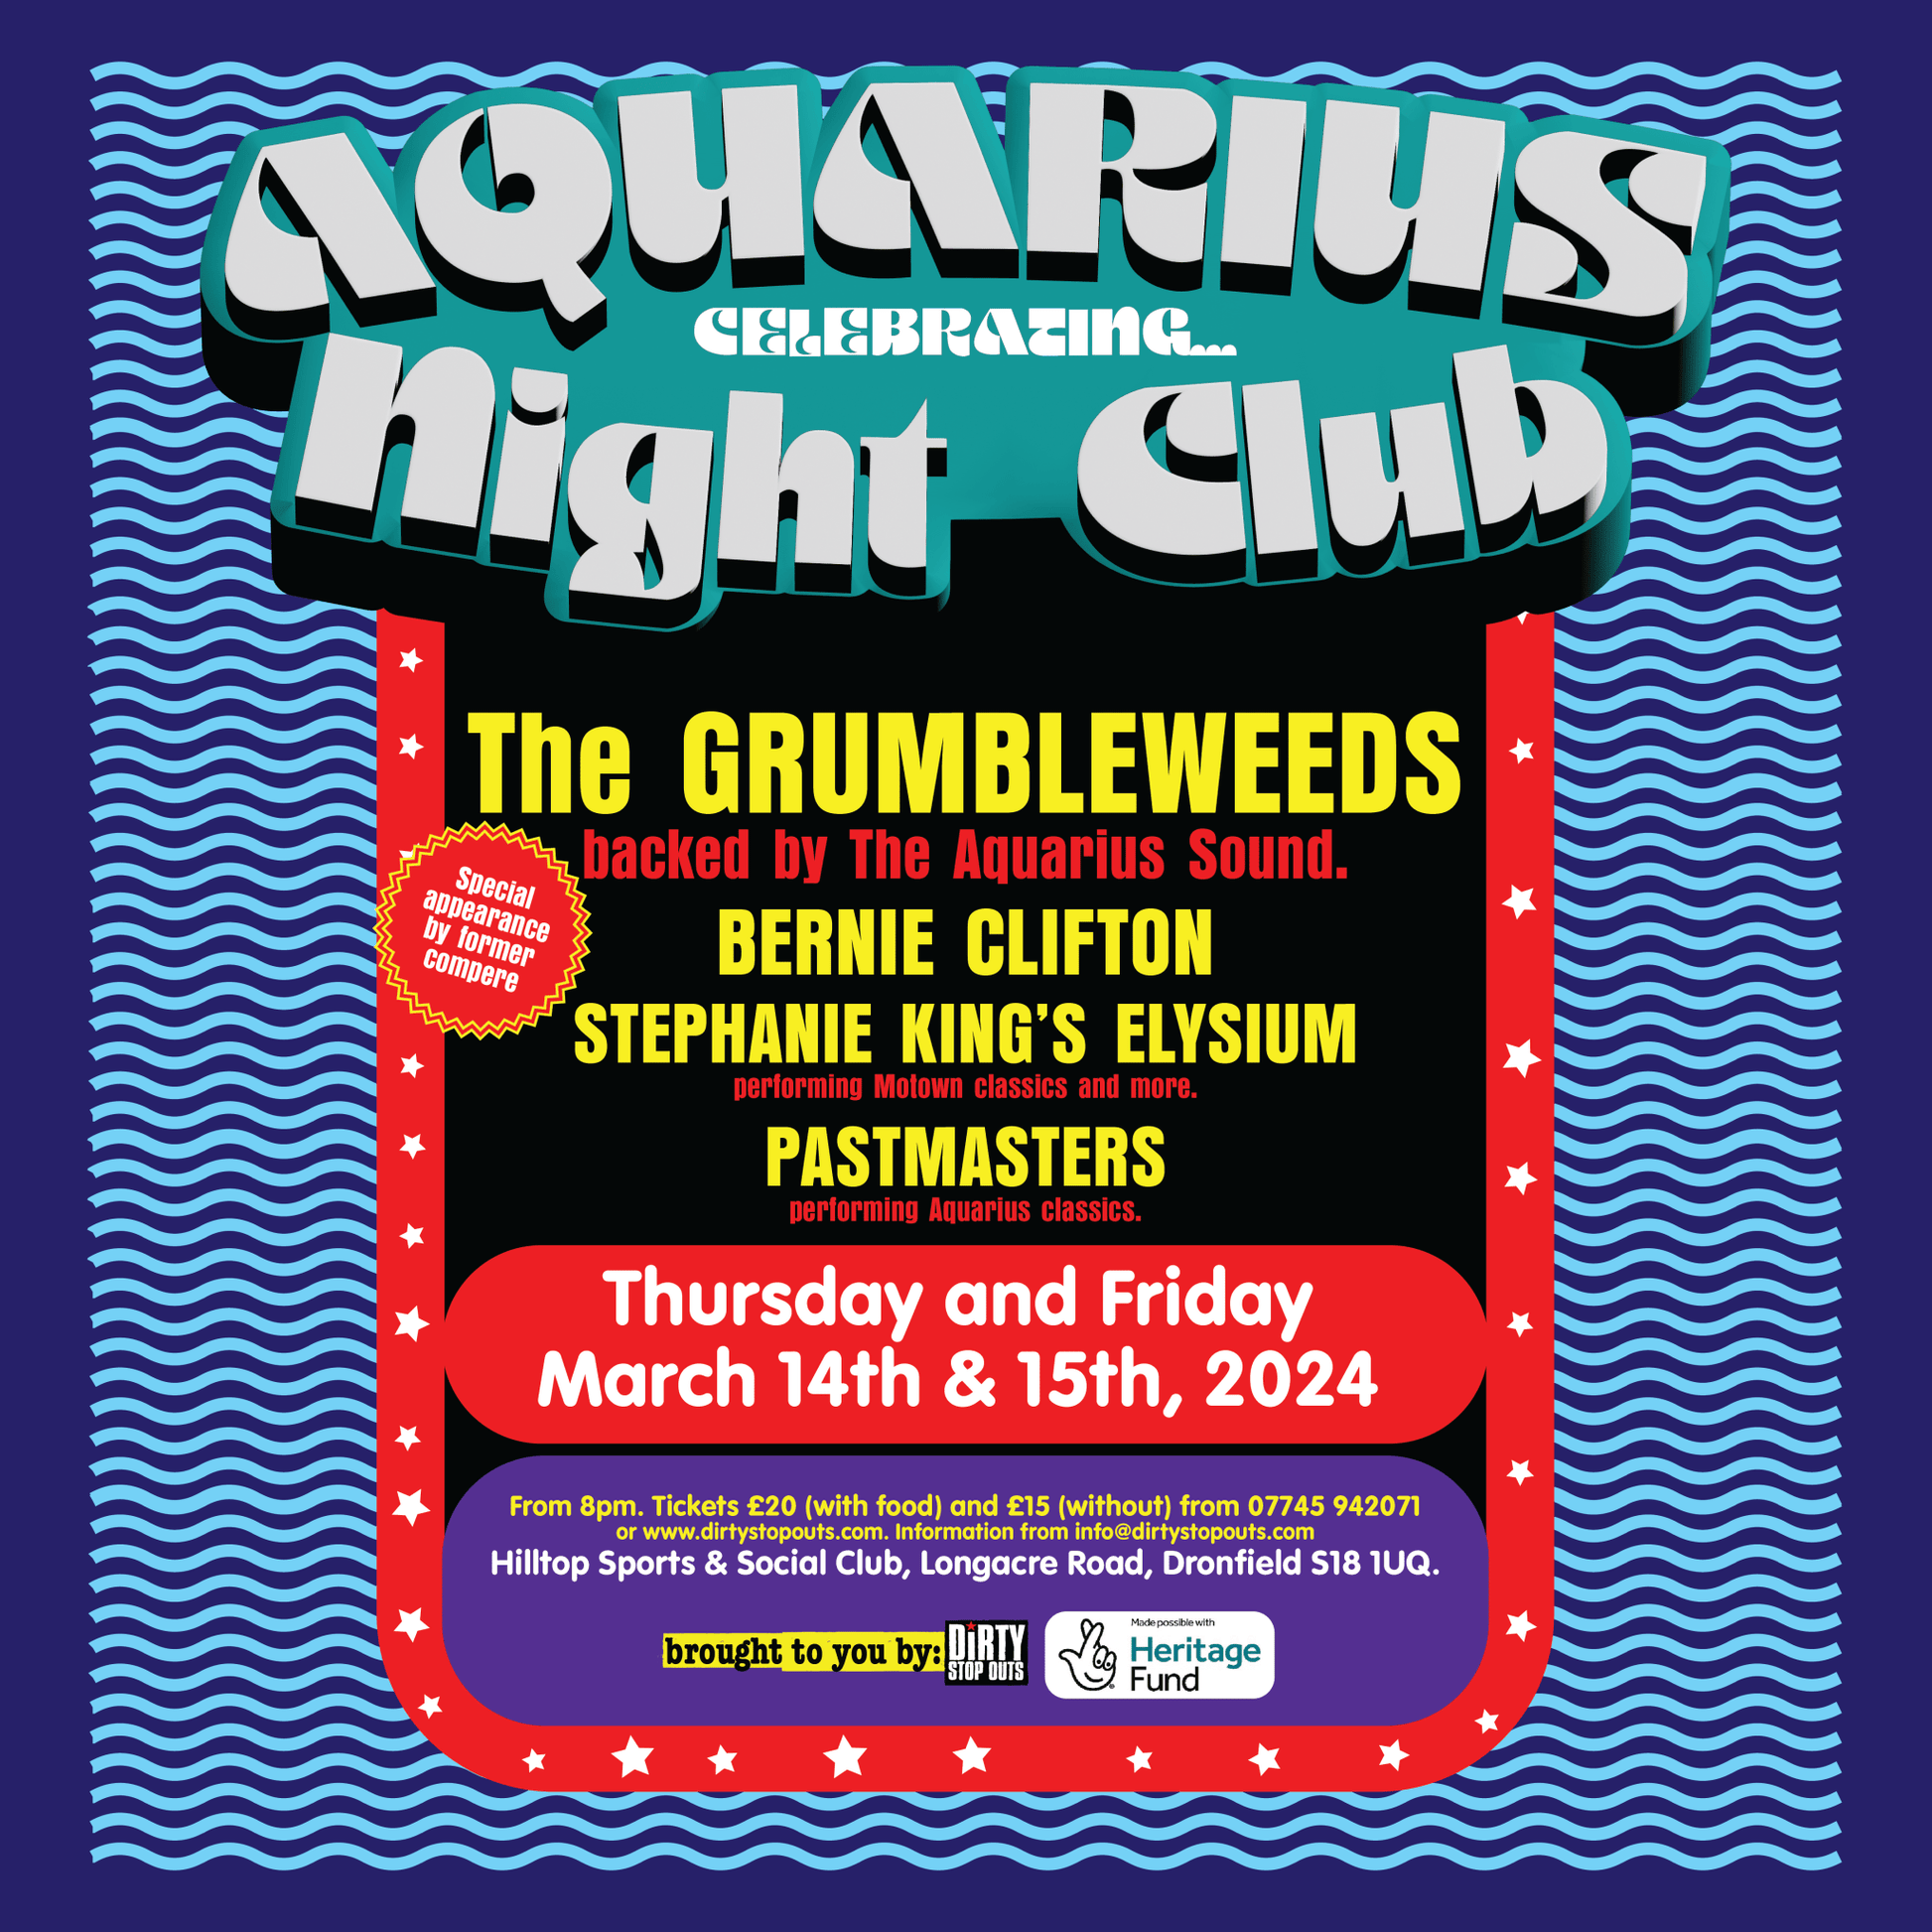 Celebrating the Aquarius - with the Grumbleweeds - Thursday, March 14th, 2024 - Dirty Stop Outs